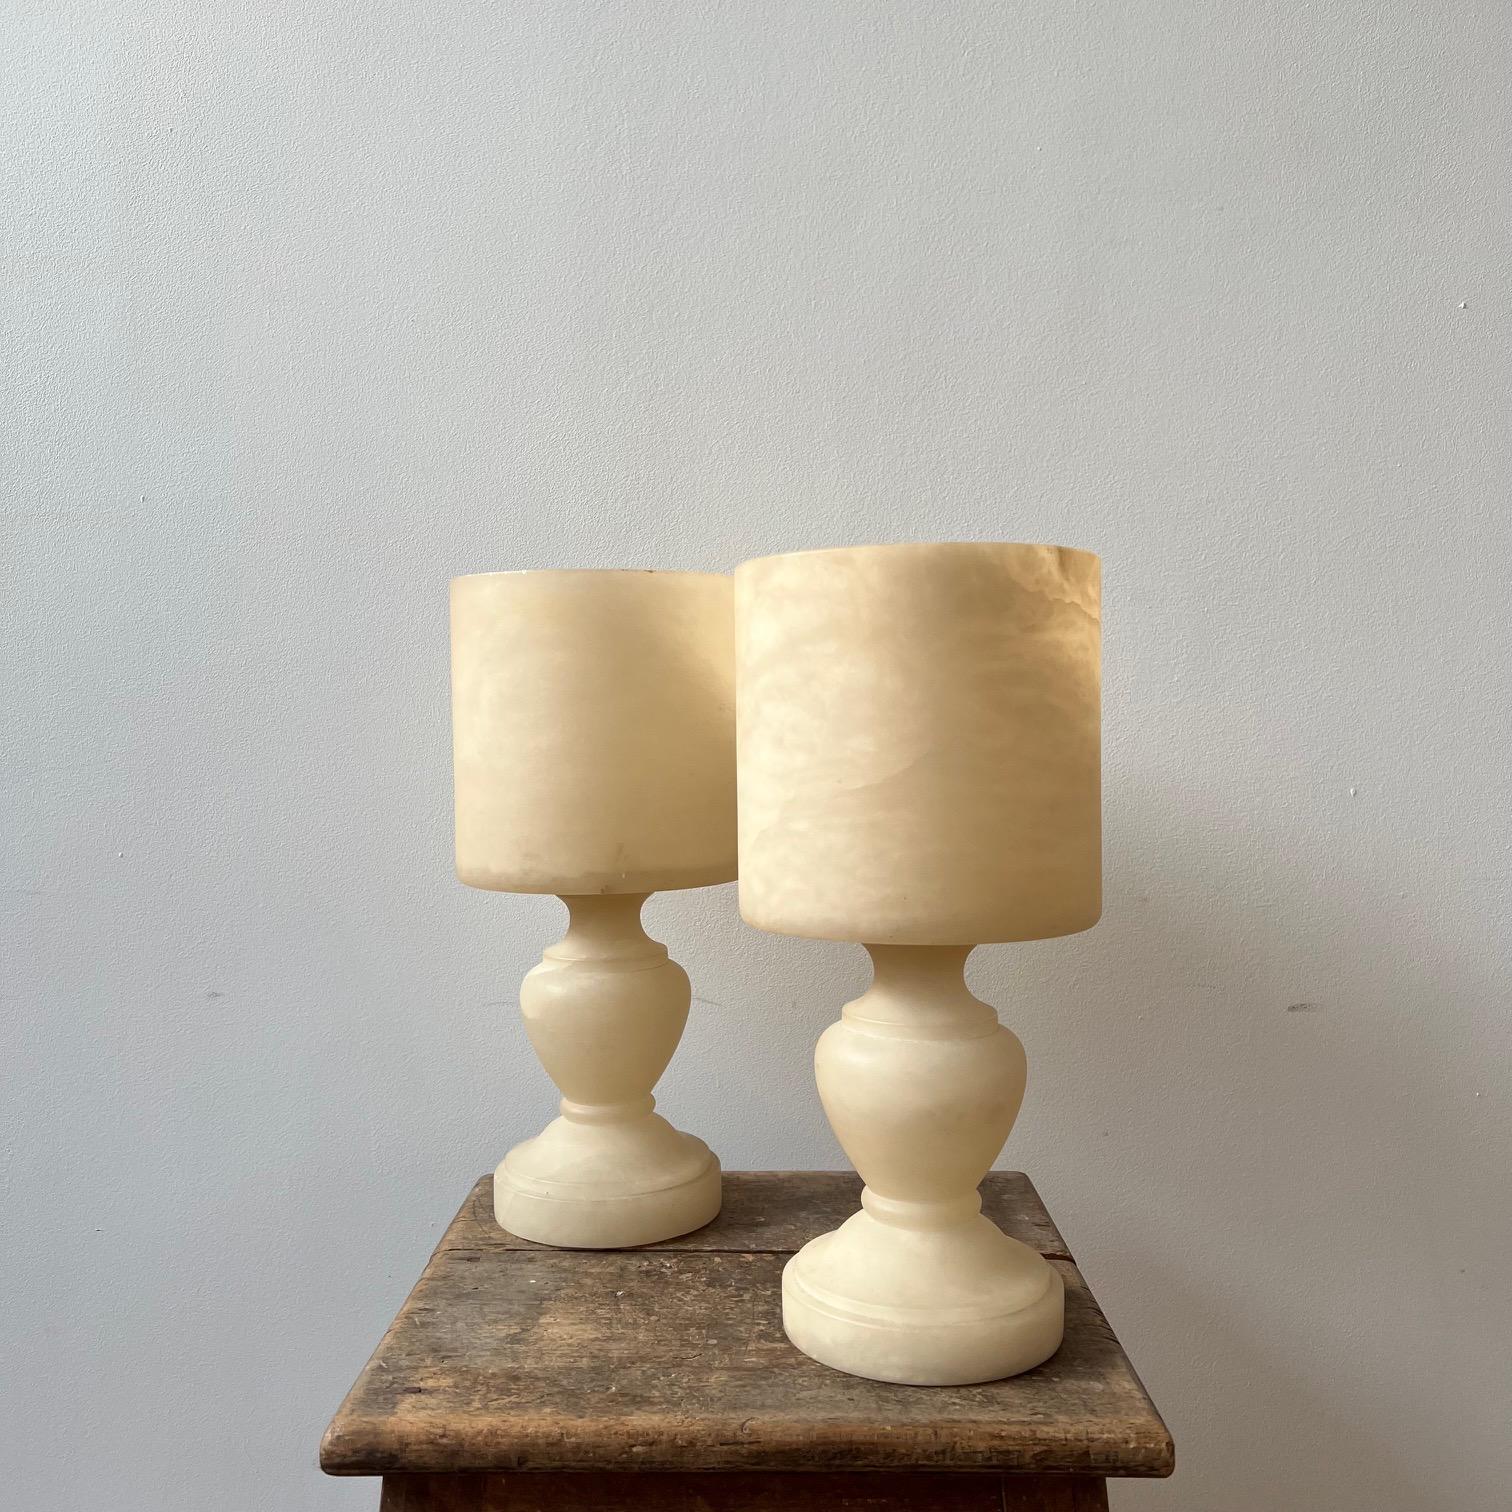 A pair of small simple table lamps. 

Sweden, c1980s. 

Good vintage condition, some small nicks and wear commensurate with age. 

Since re-wired and PAT tested. 

Price is for the pair. 

Location: London Gallery. 

Dimensions: 31.5